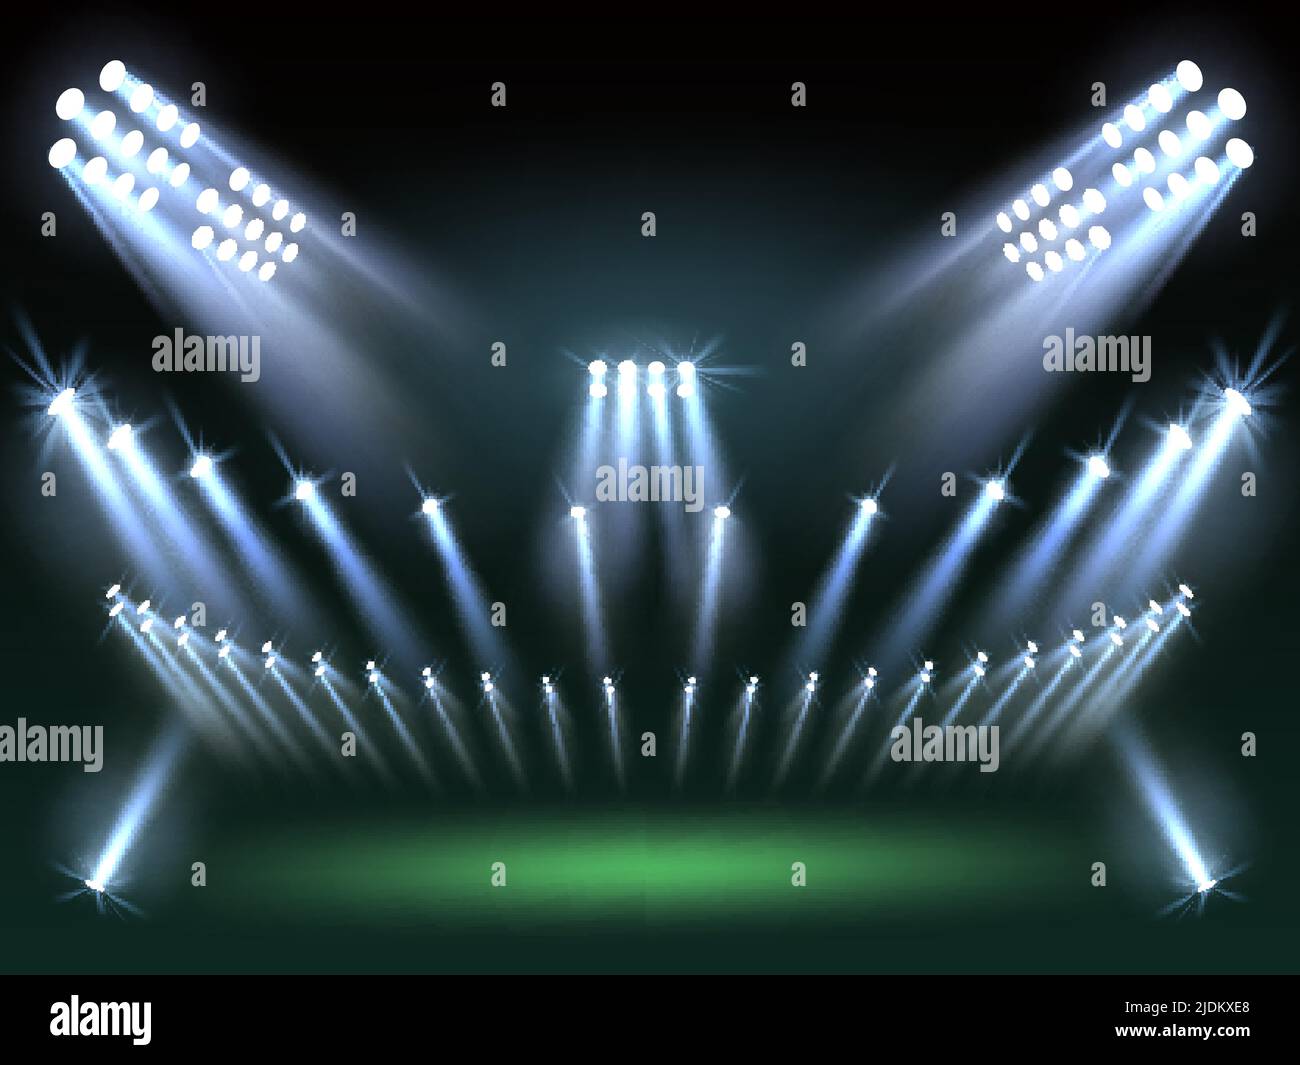 Stadium lights background. Directional sources, football field searchlights, cold rays, sport arena lighting design, different projectors, Illuminated Stock Vector